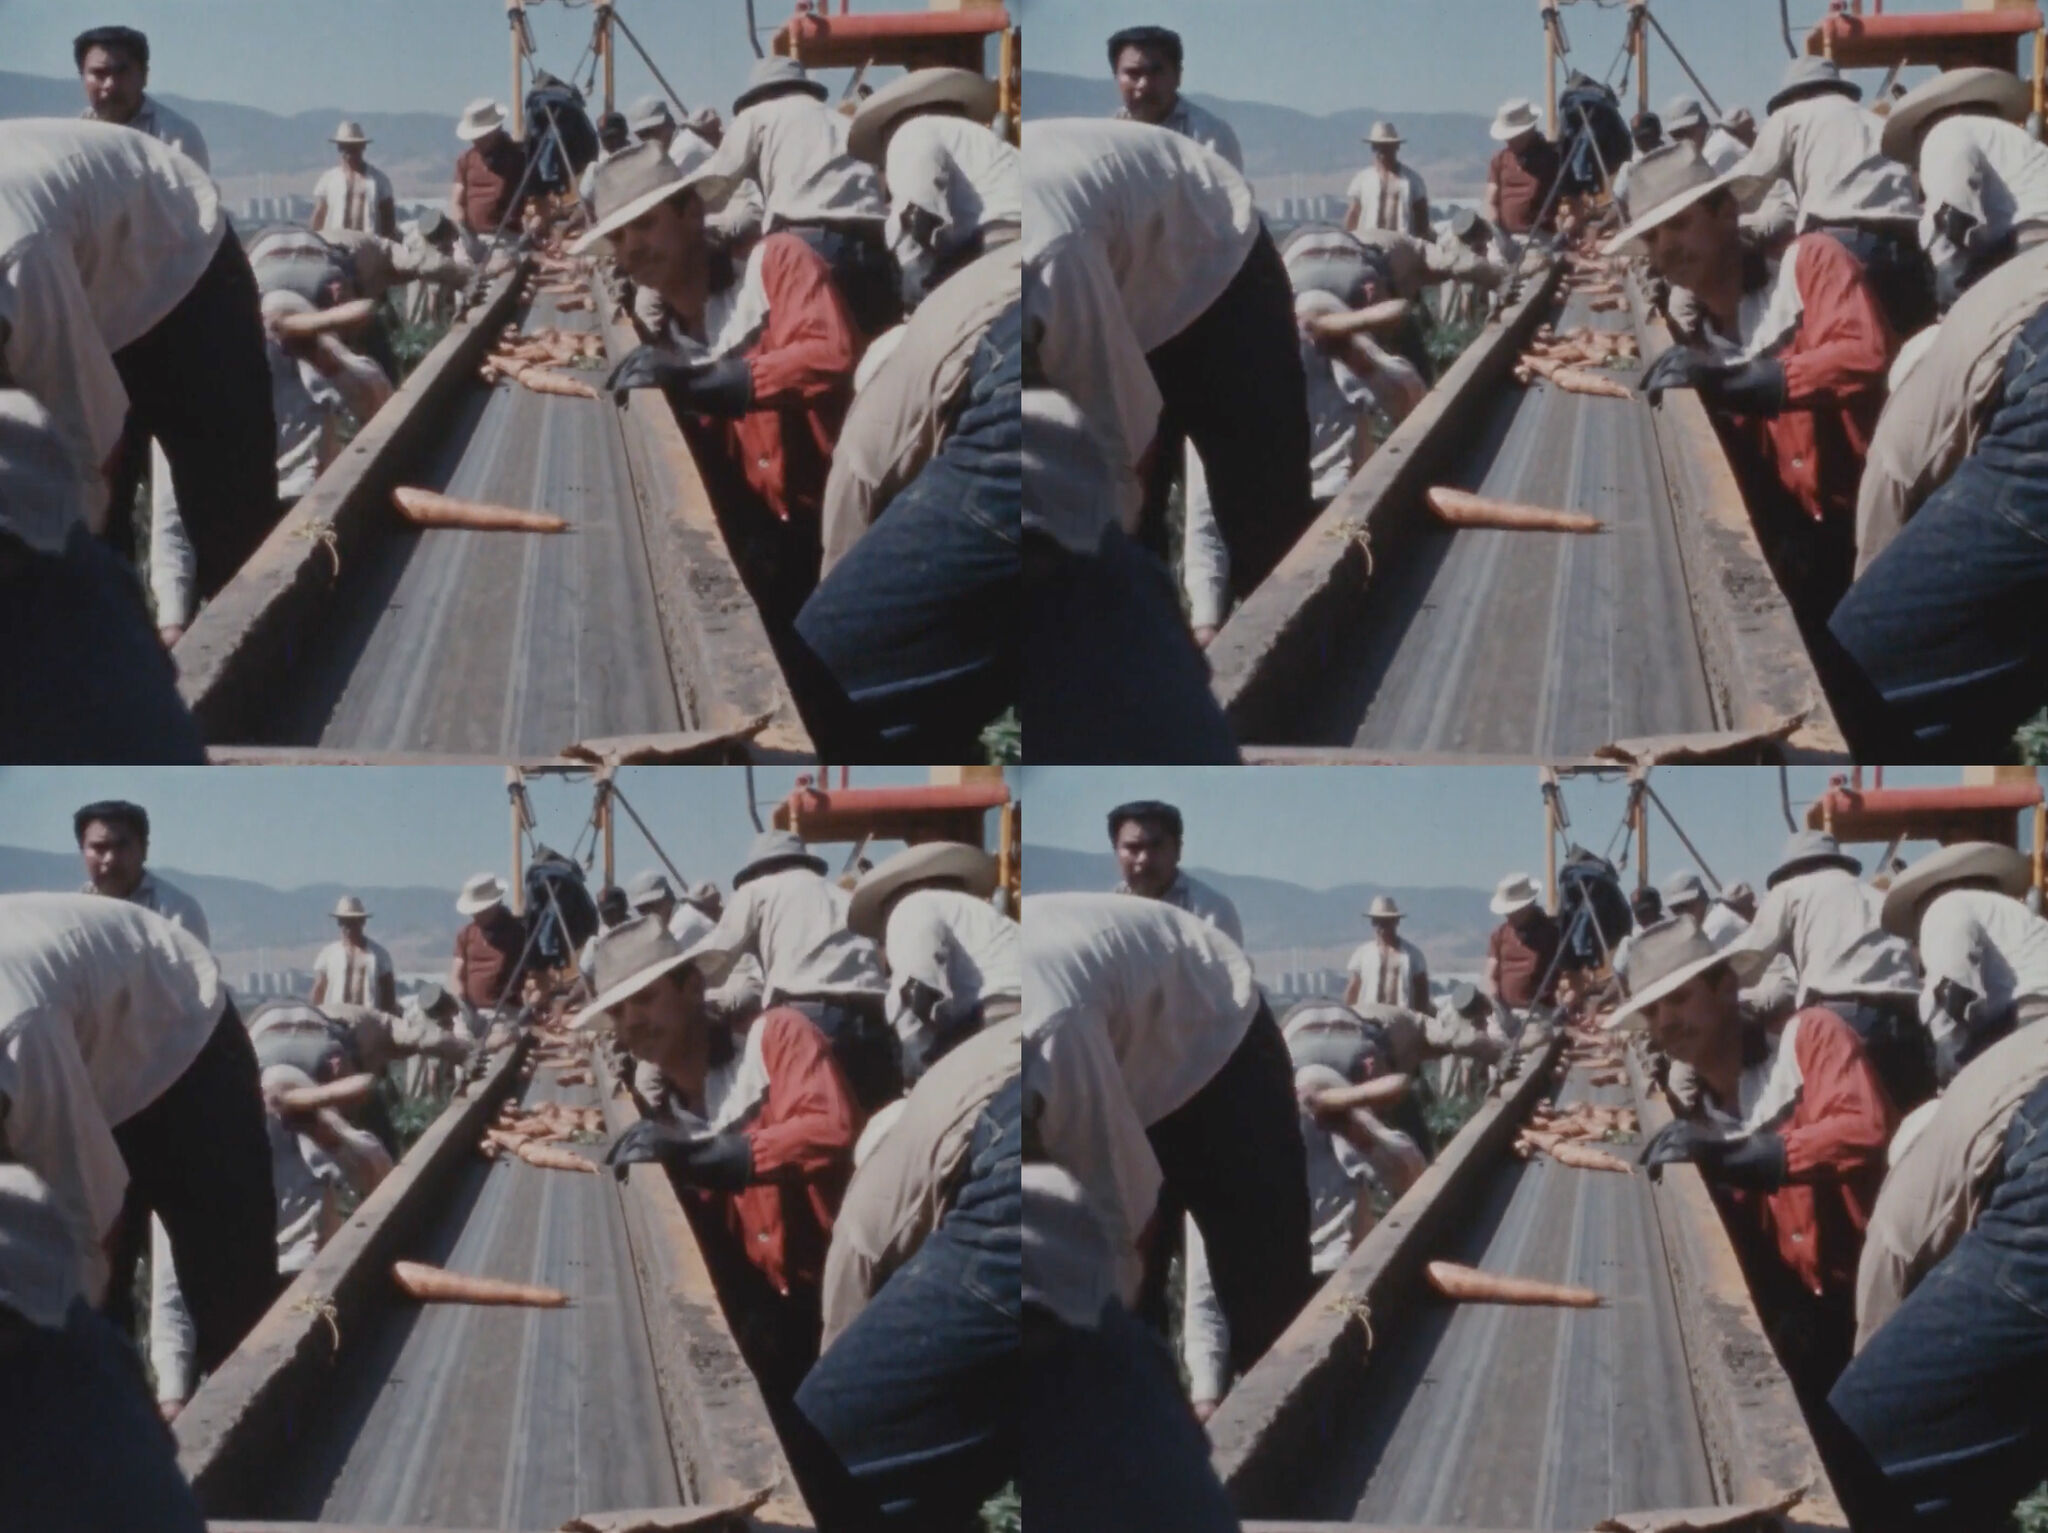 4 identical archival images each in their own quadrant of men working in a field, next to a conveyer belt carrying vegetables.